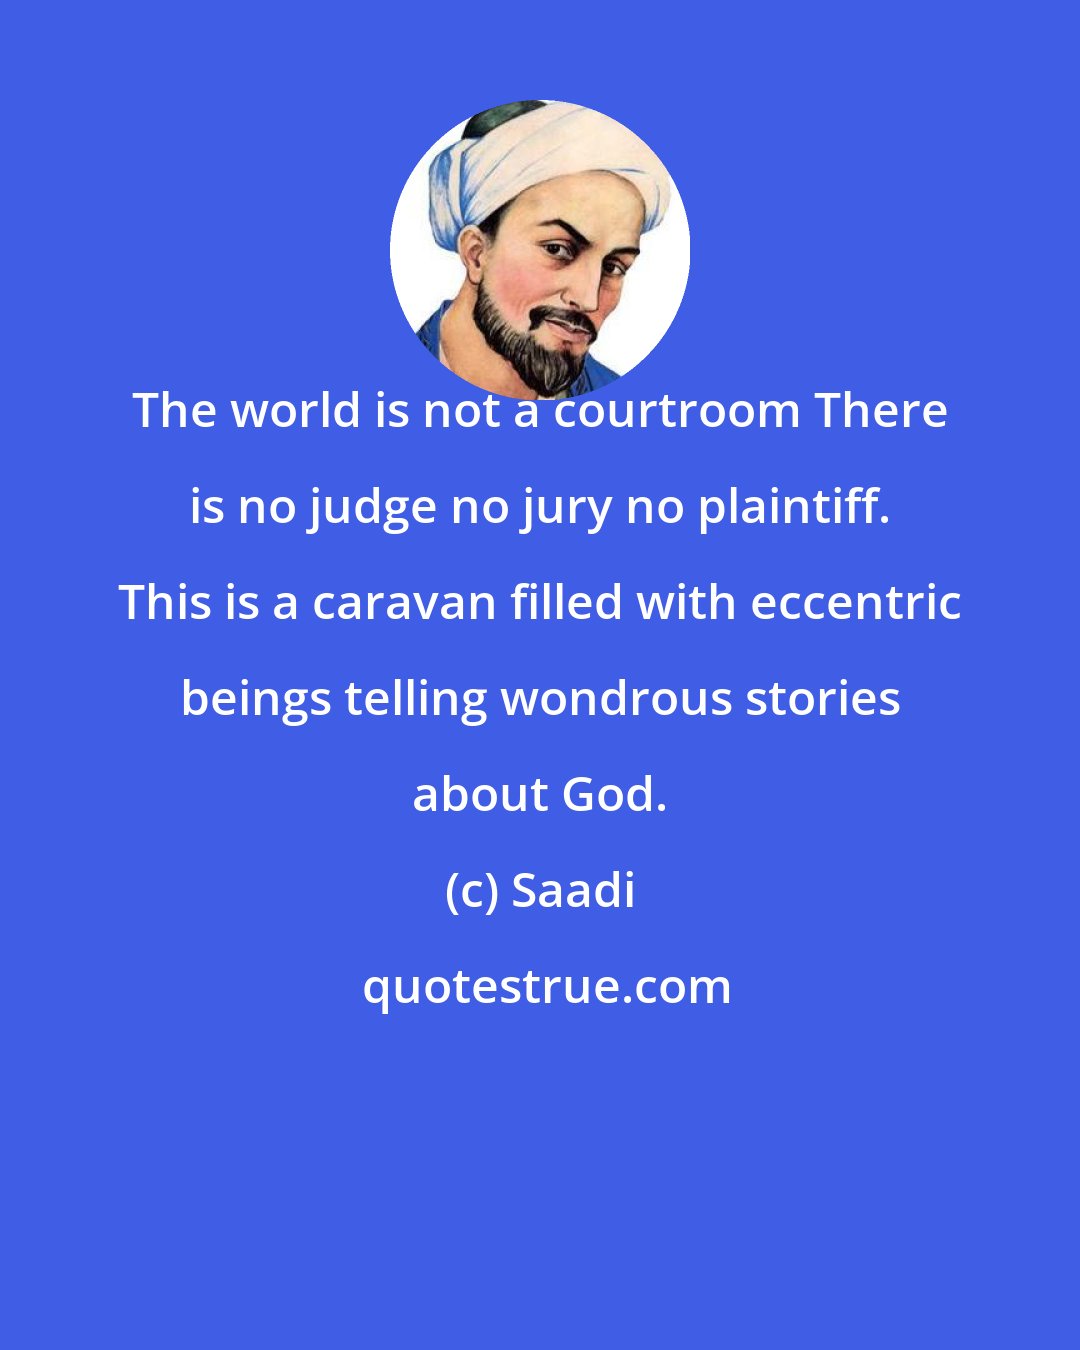 Saadi: The world is not a courtroom There is no judge no jury no plaintiff. This is a caravan filled with eccentric beings telling wondrous stories about God.